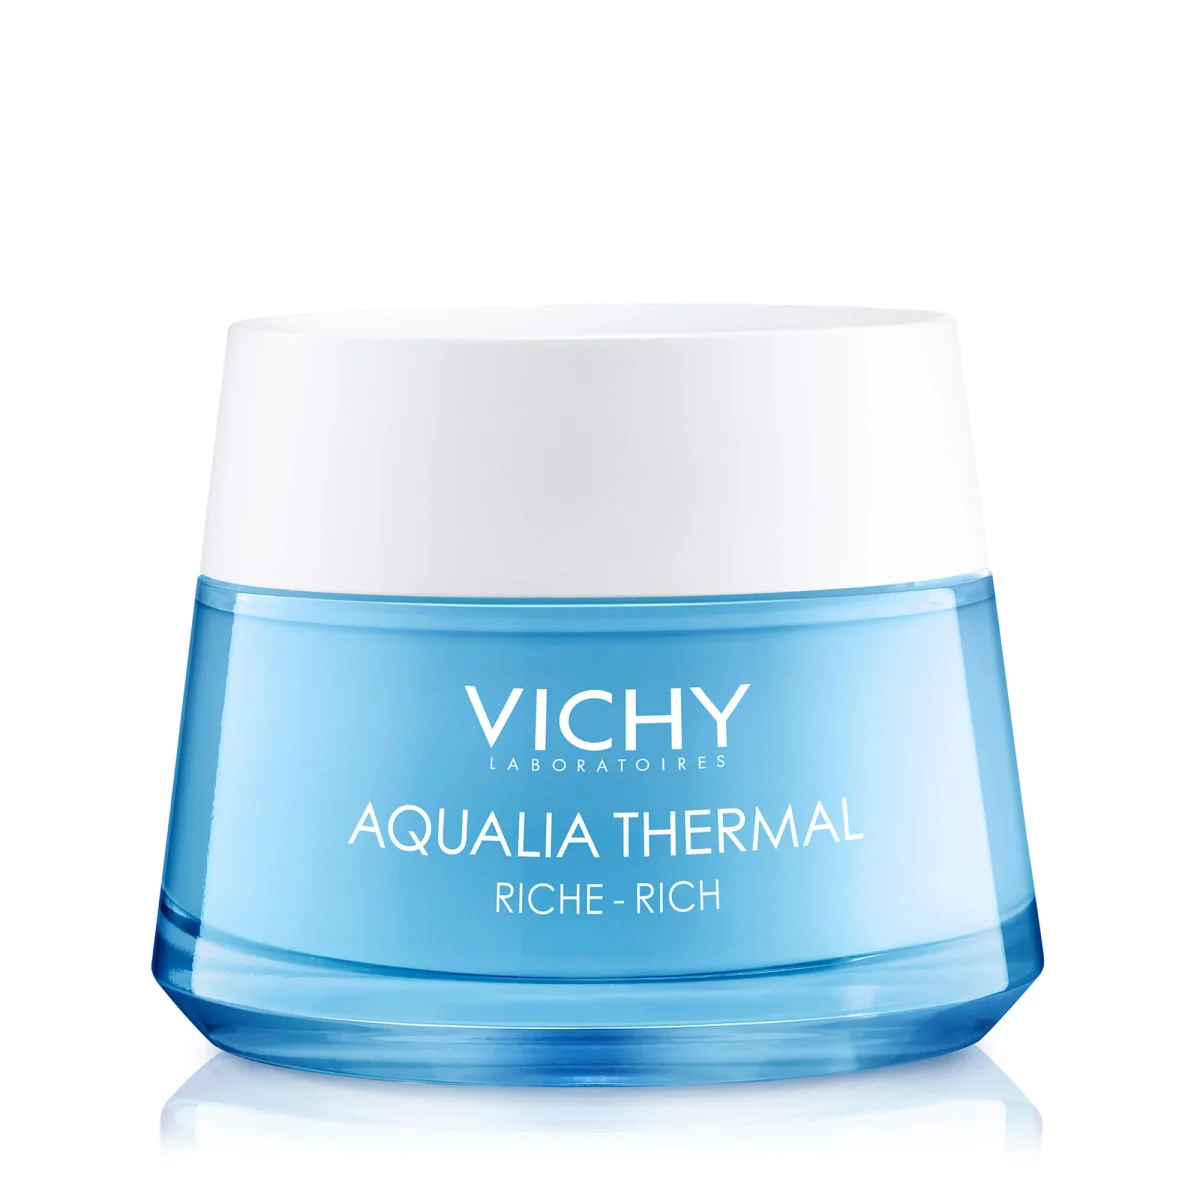 Vichy Aqualia Thermal Rich Face Cream Moisturizer for Dry Skin with Hyaluronic acid 50ml